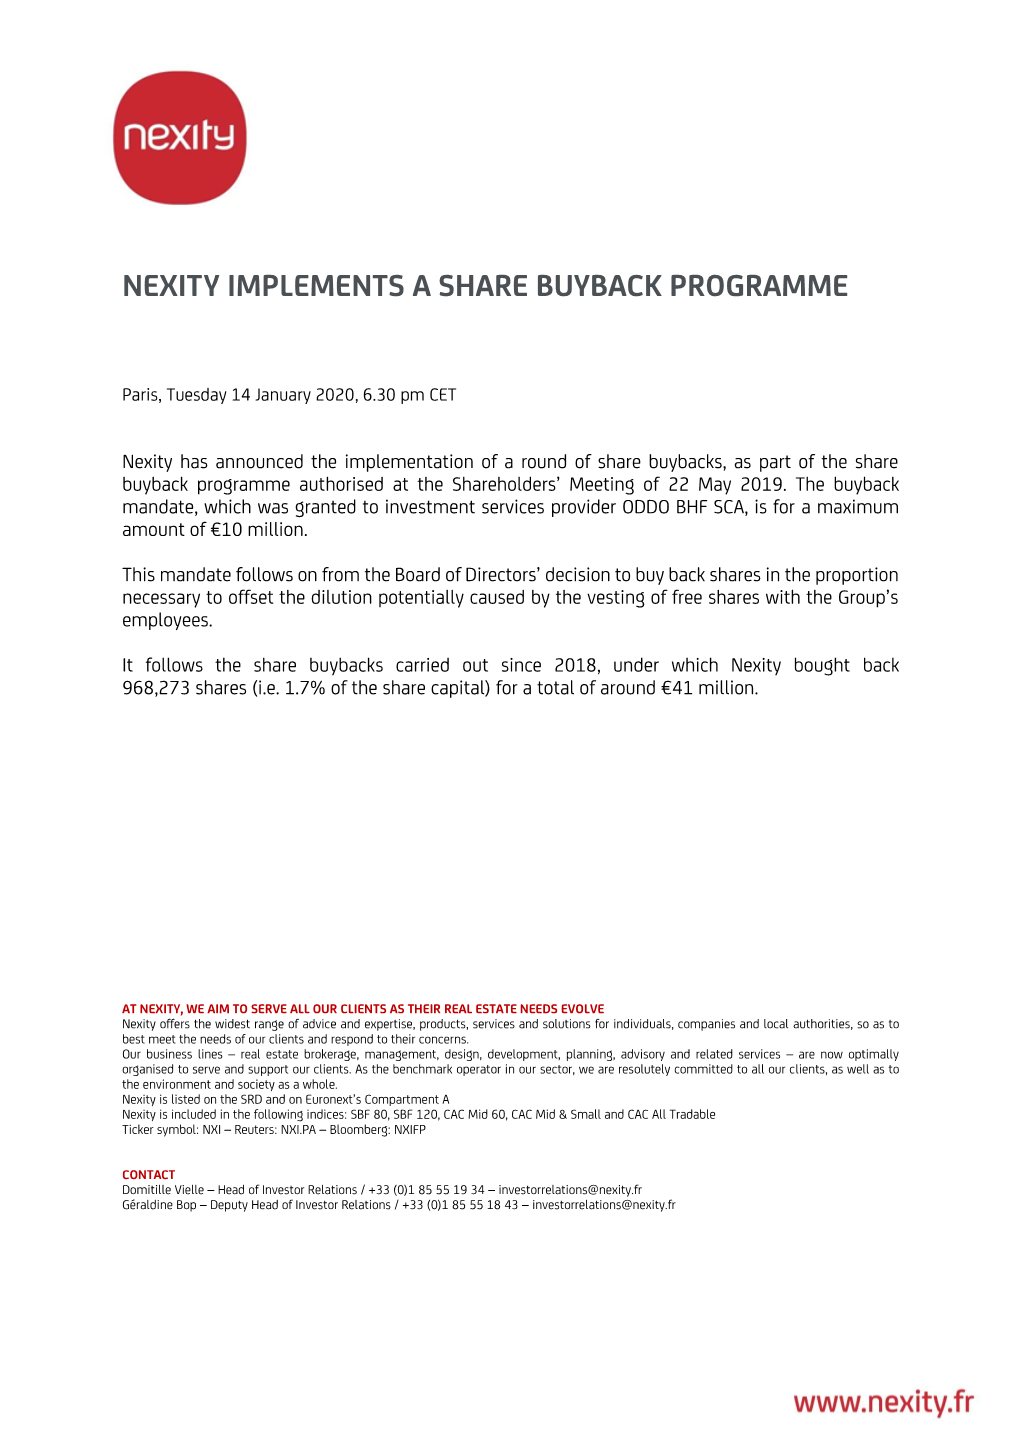 Nexity Implements a Share Buyback Programme